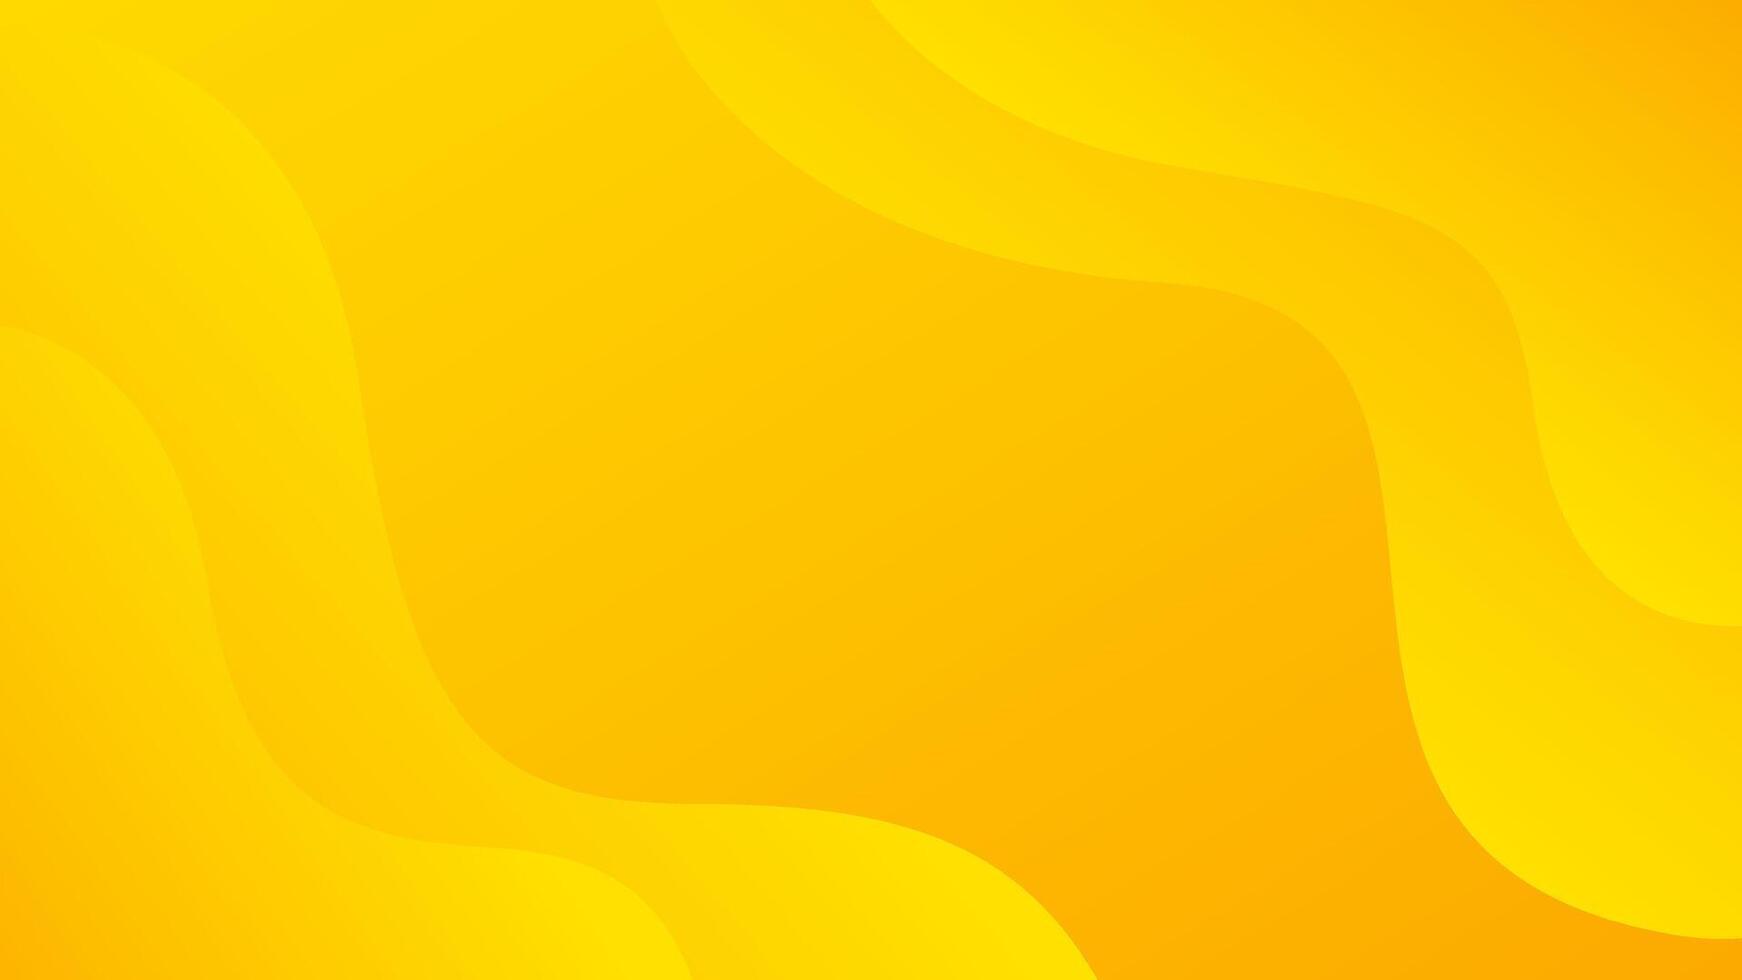 Bright yellow dynamic abstract background. Modern lemon orange color. Fresh template banner for web, pages, sales, events, holidays, parties, and falling. waving shapes with soft shadow vector